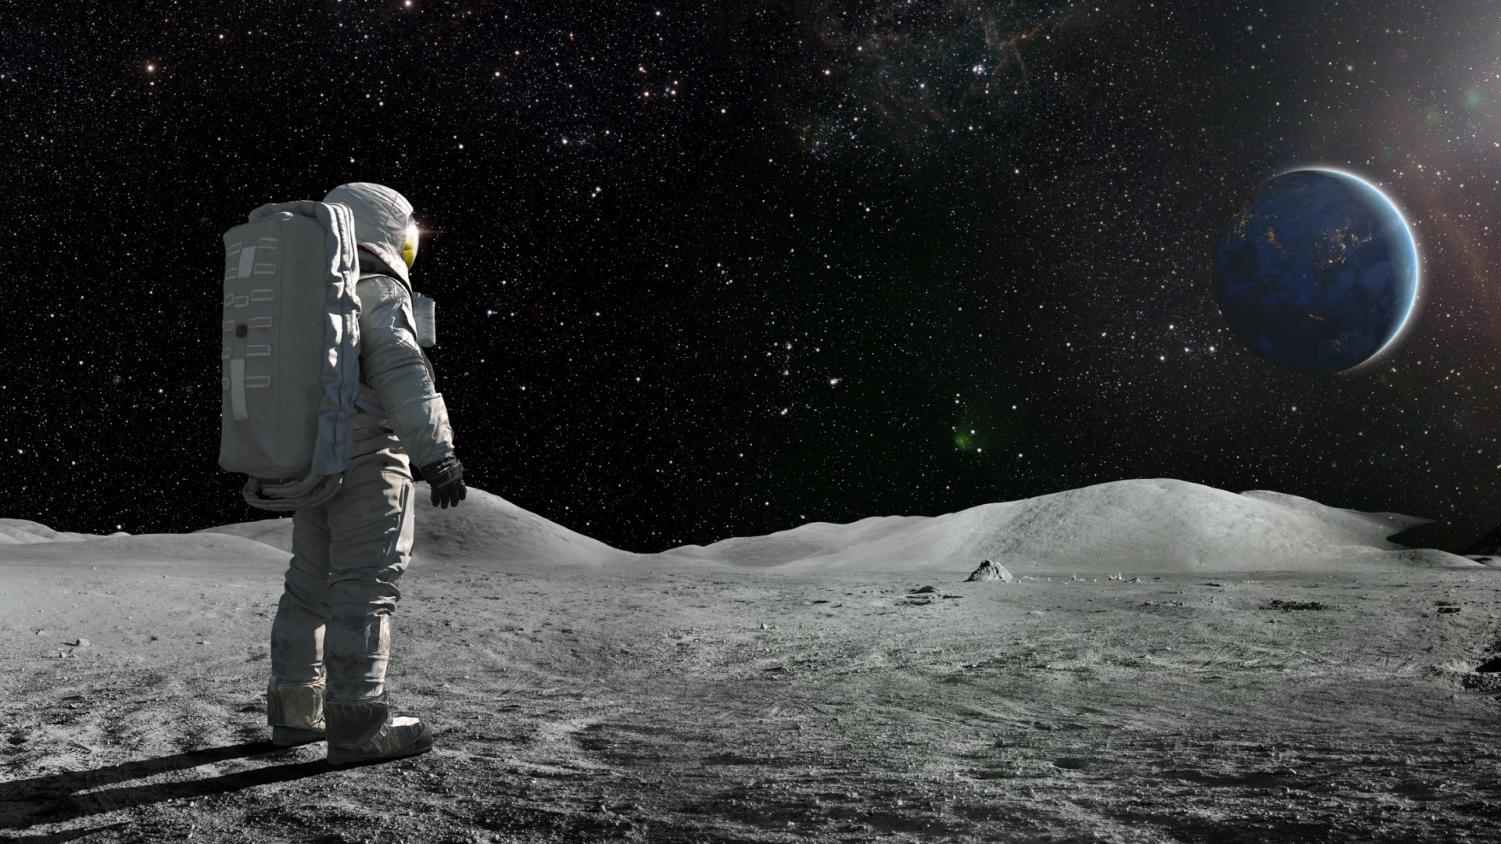 A New Manned Mission To The Moon